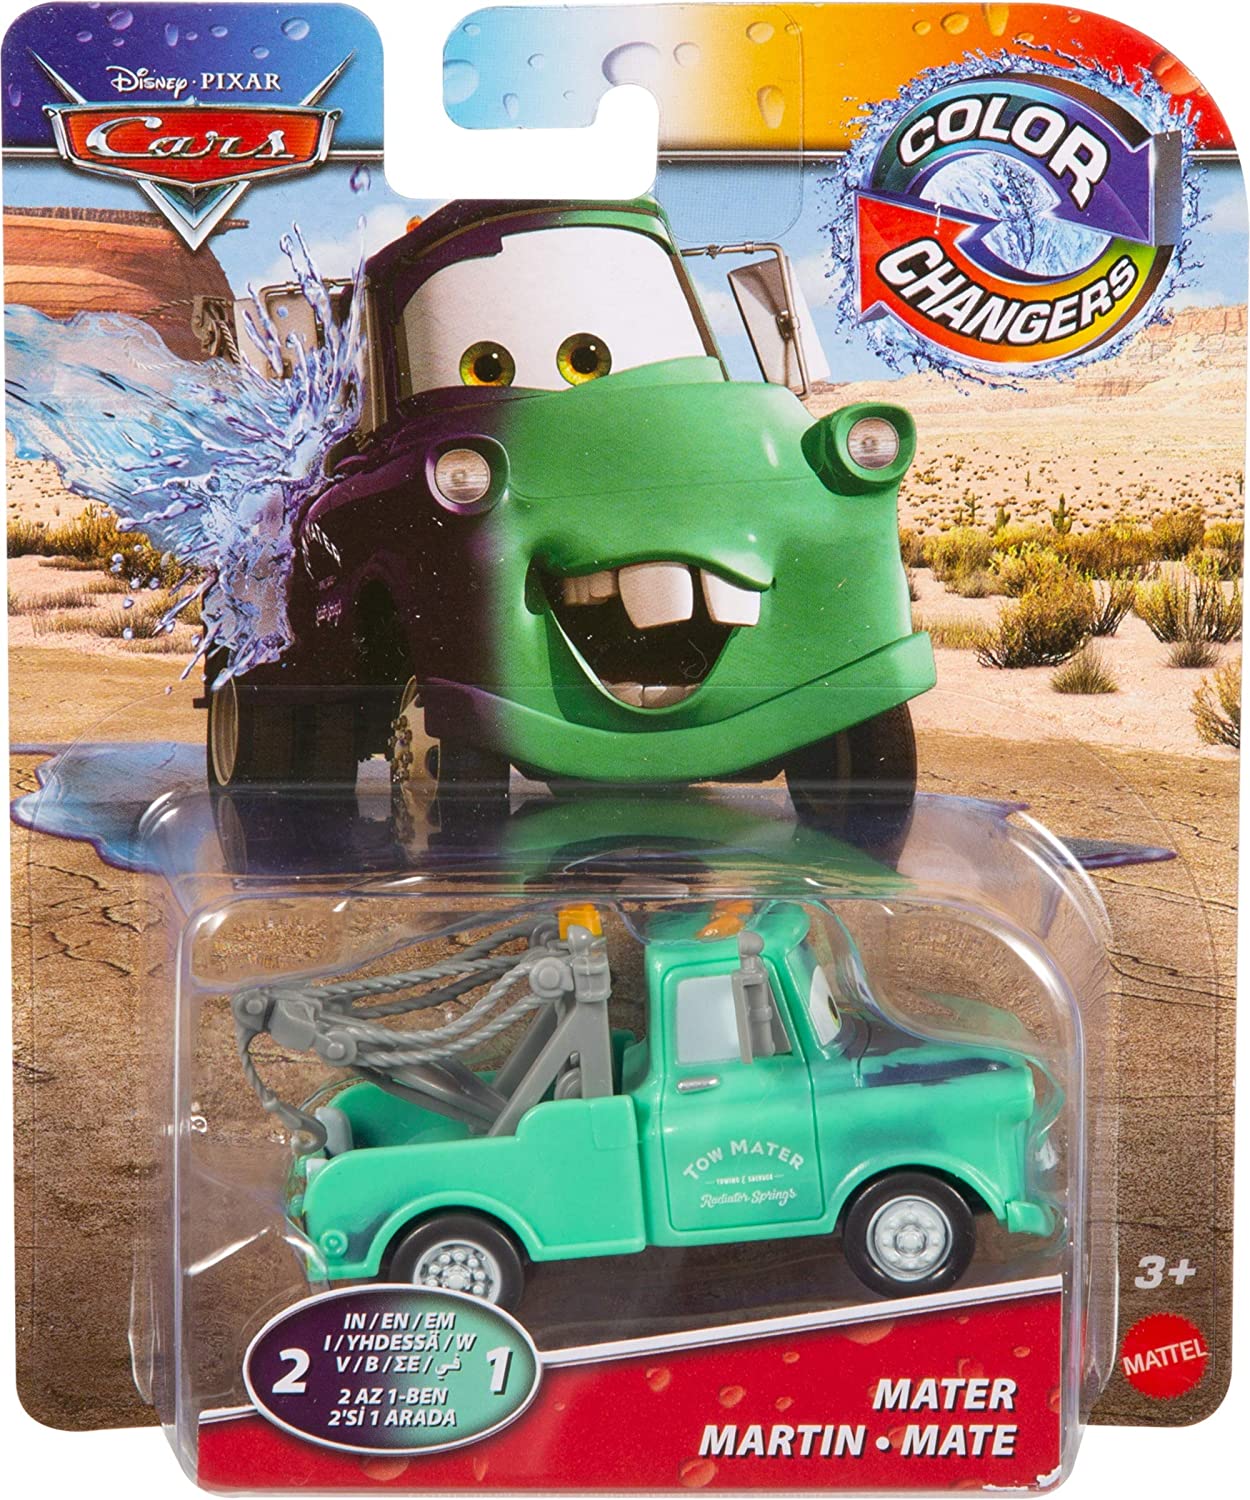 Kaufe Disney Cars - Color Changers - Mater (GNY) - Mater - Cars